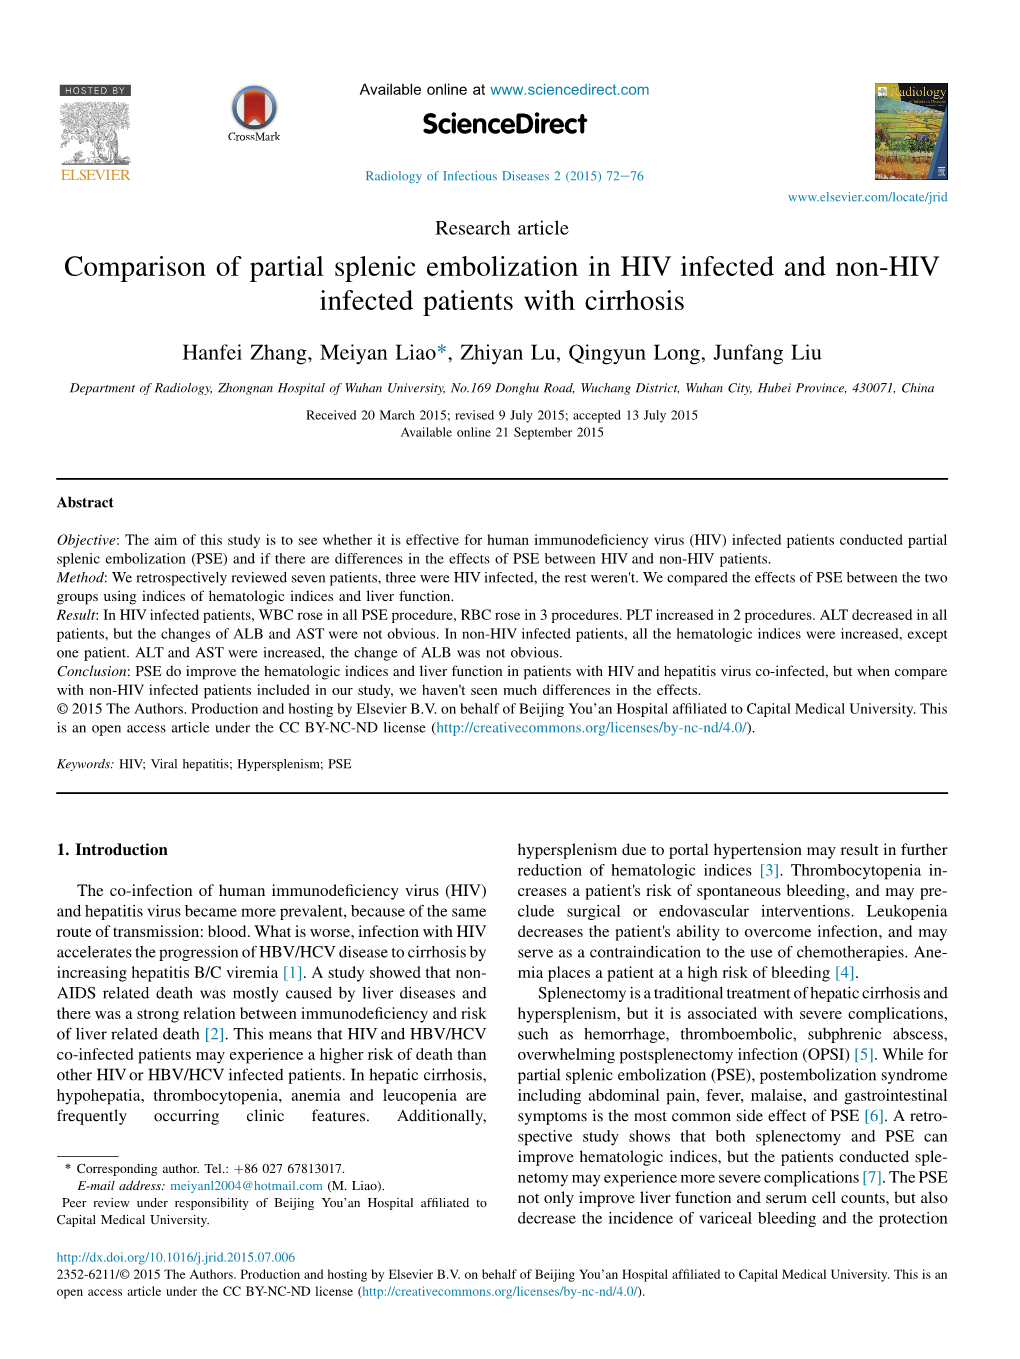 Comparison of Partial Splenic Embolization in HIV Infected and Non-HIV Infected Patients with Cirrhosis